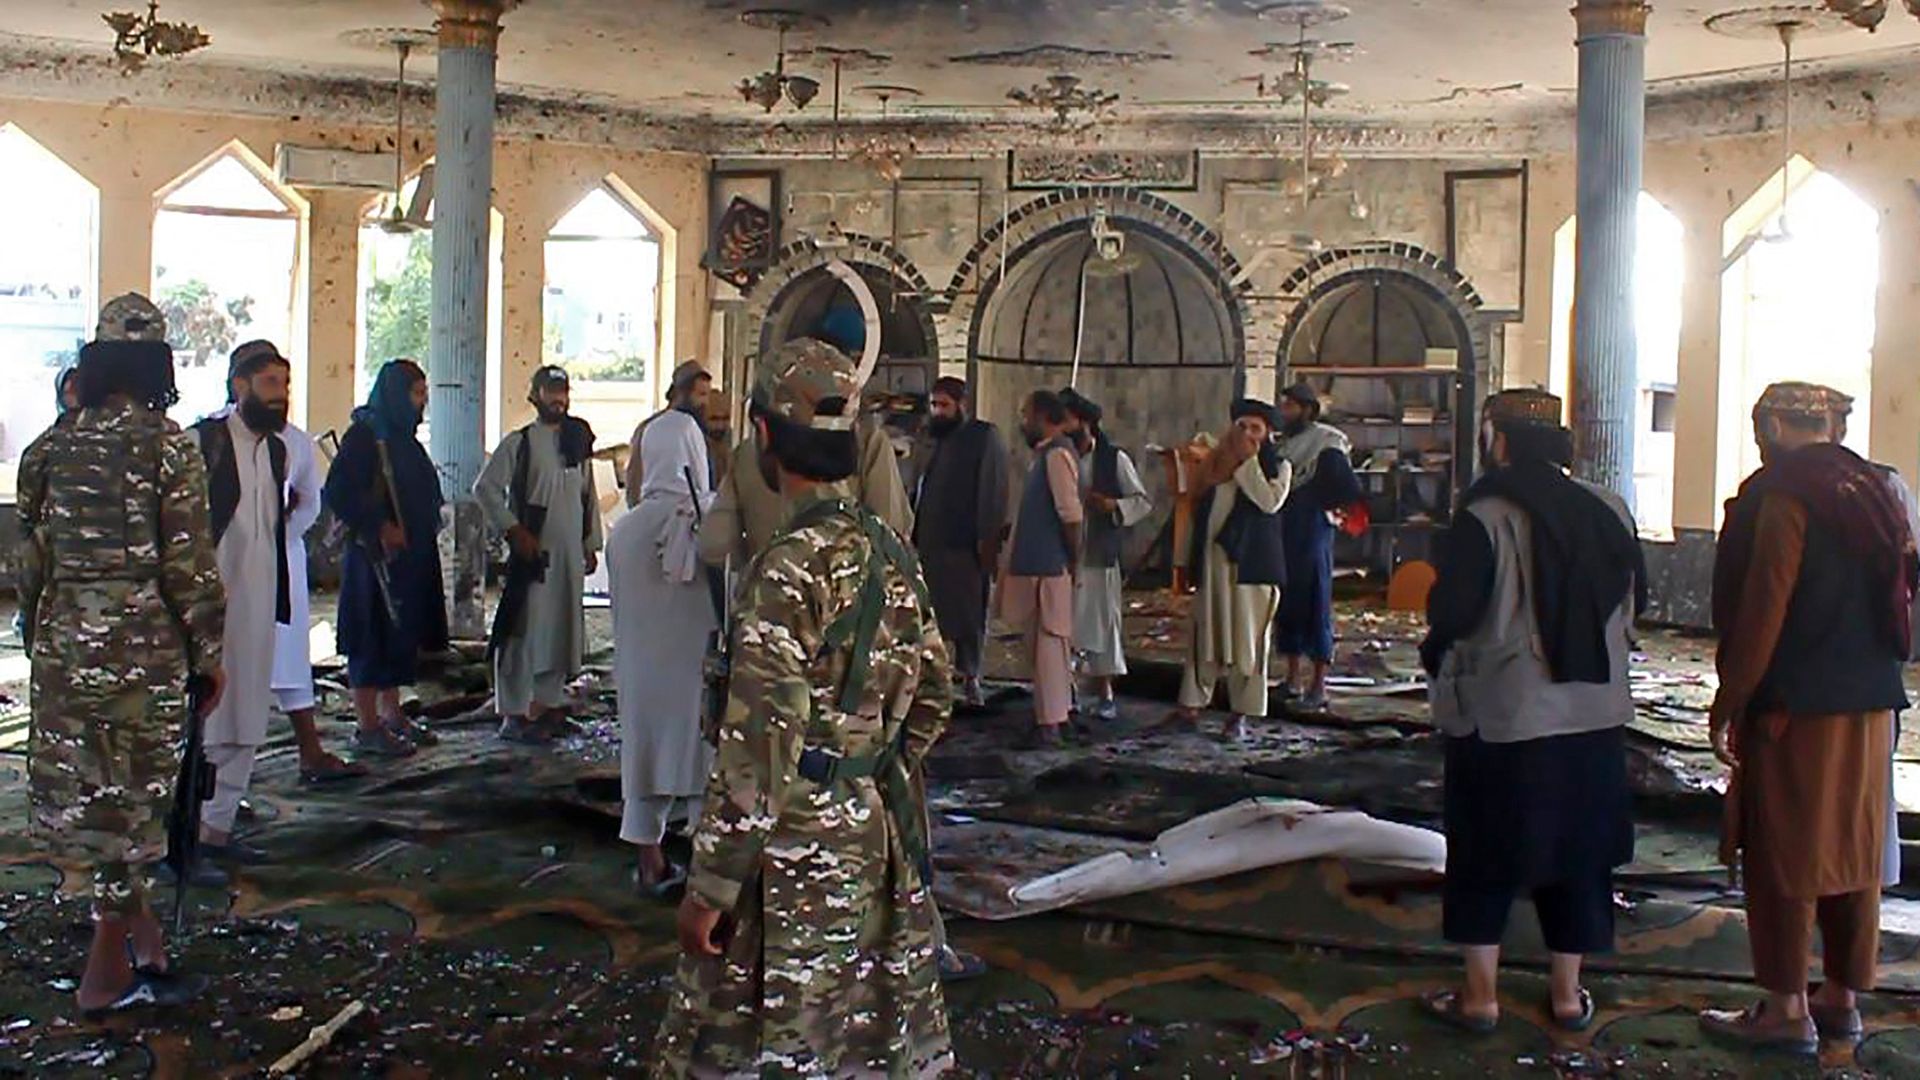 Taliban fighters investigate inside a Shiite mosque after a suicide bomb attack in Kunduz